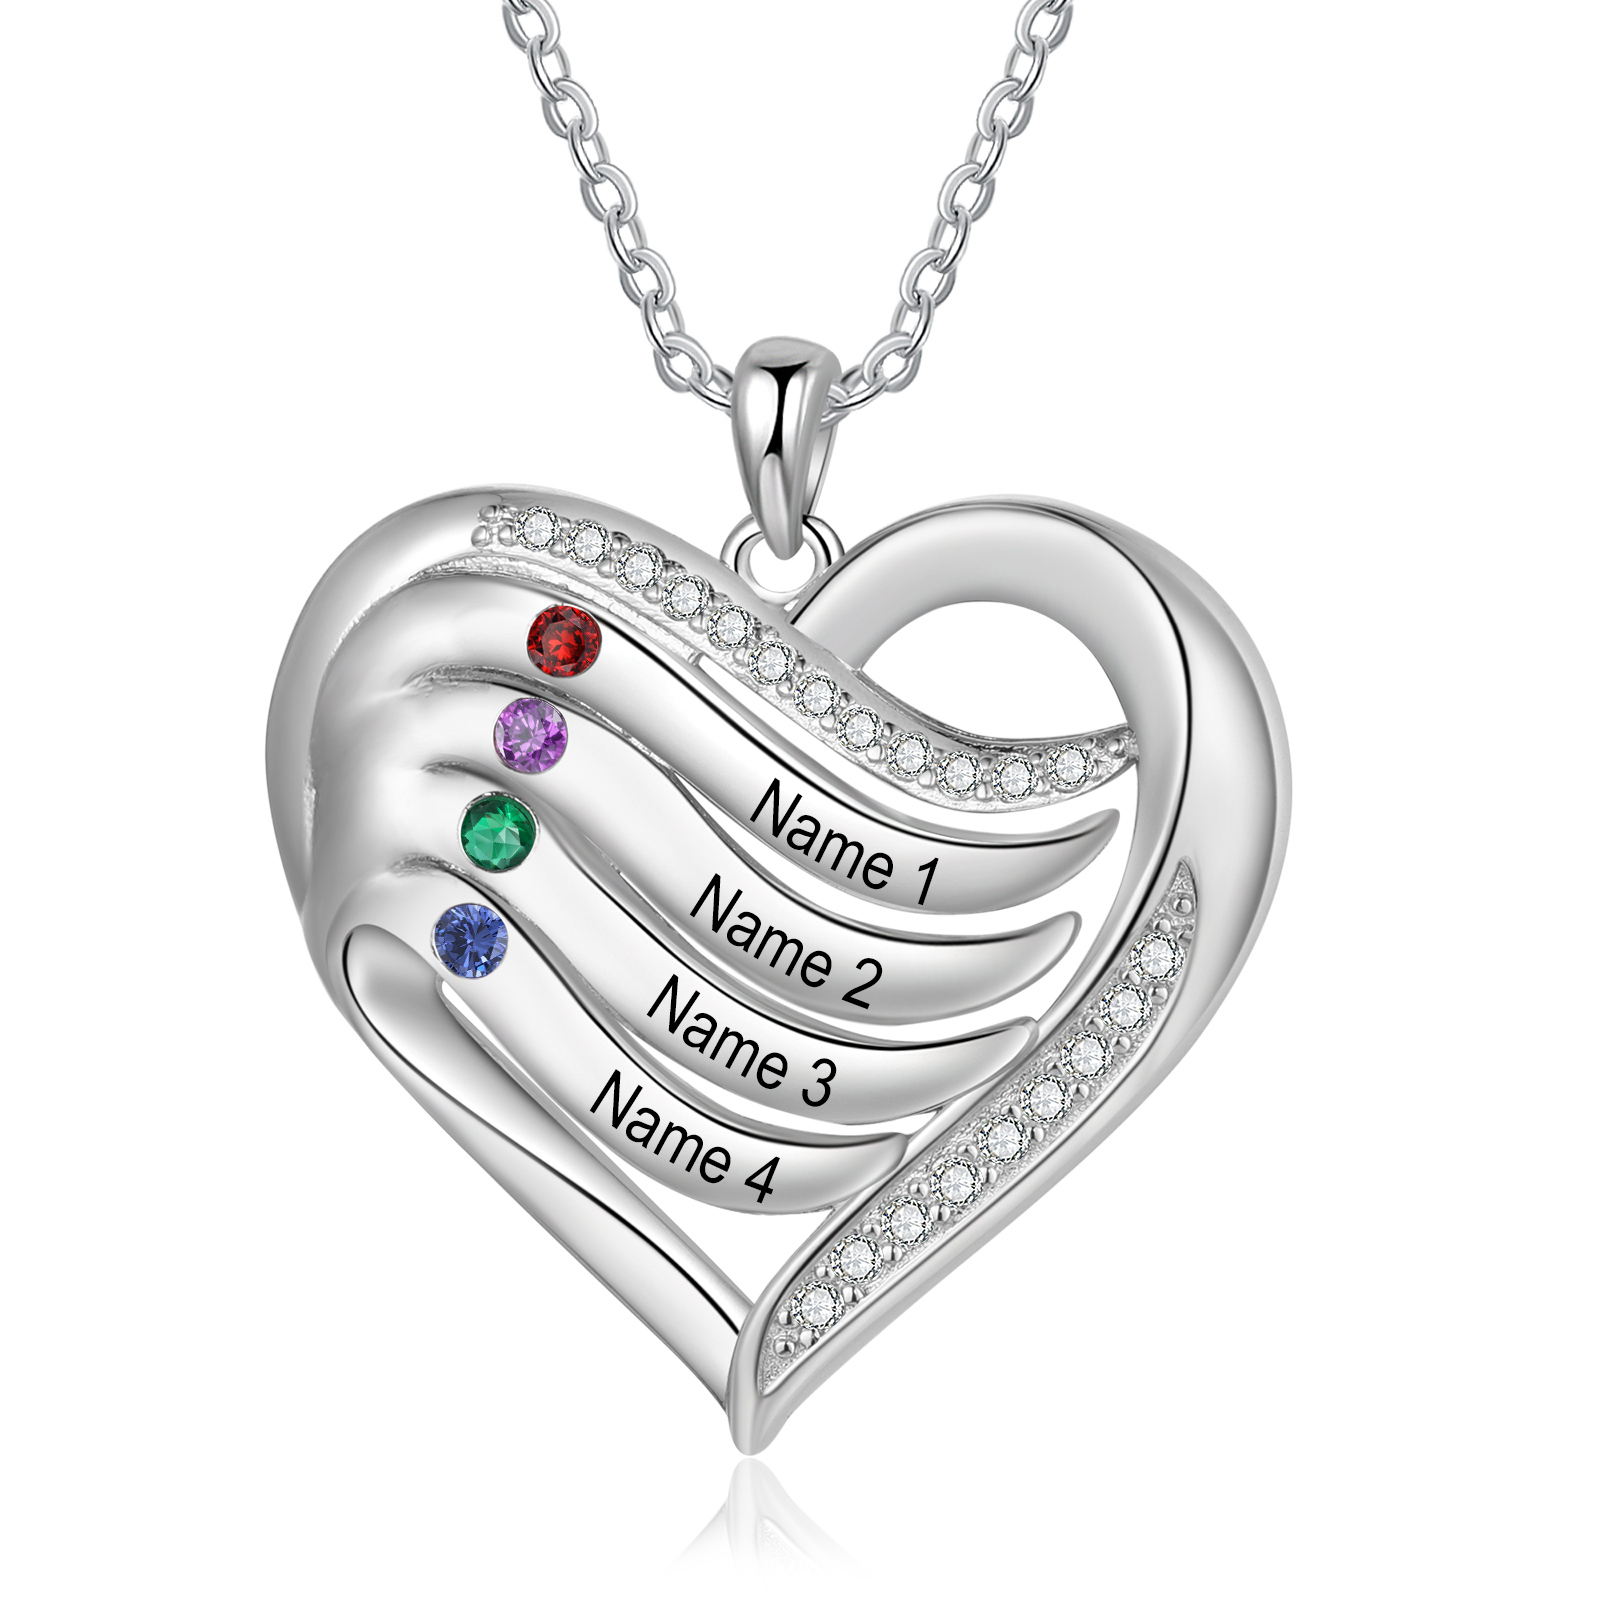 4 Names - Personalized Heart Necklace in Silver with Birthstone and Name Beautiful Gift for Her